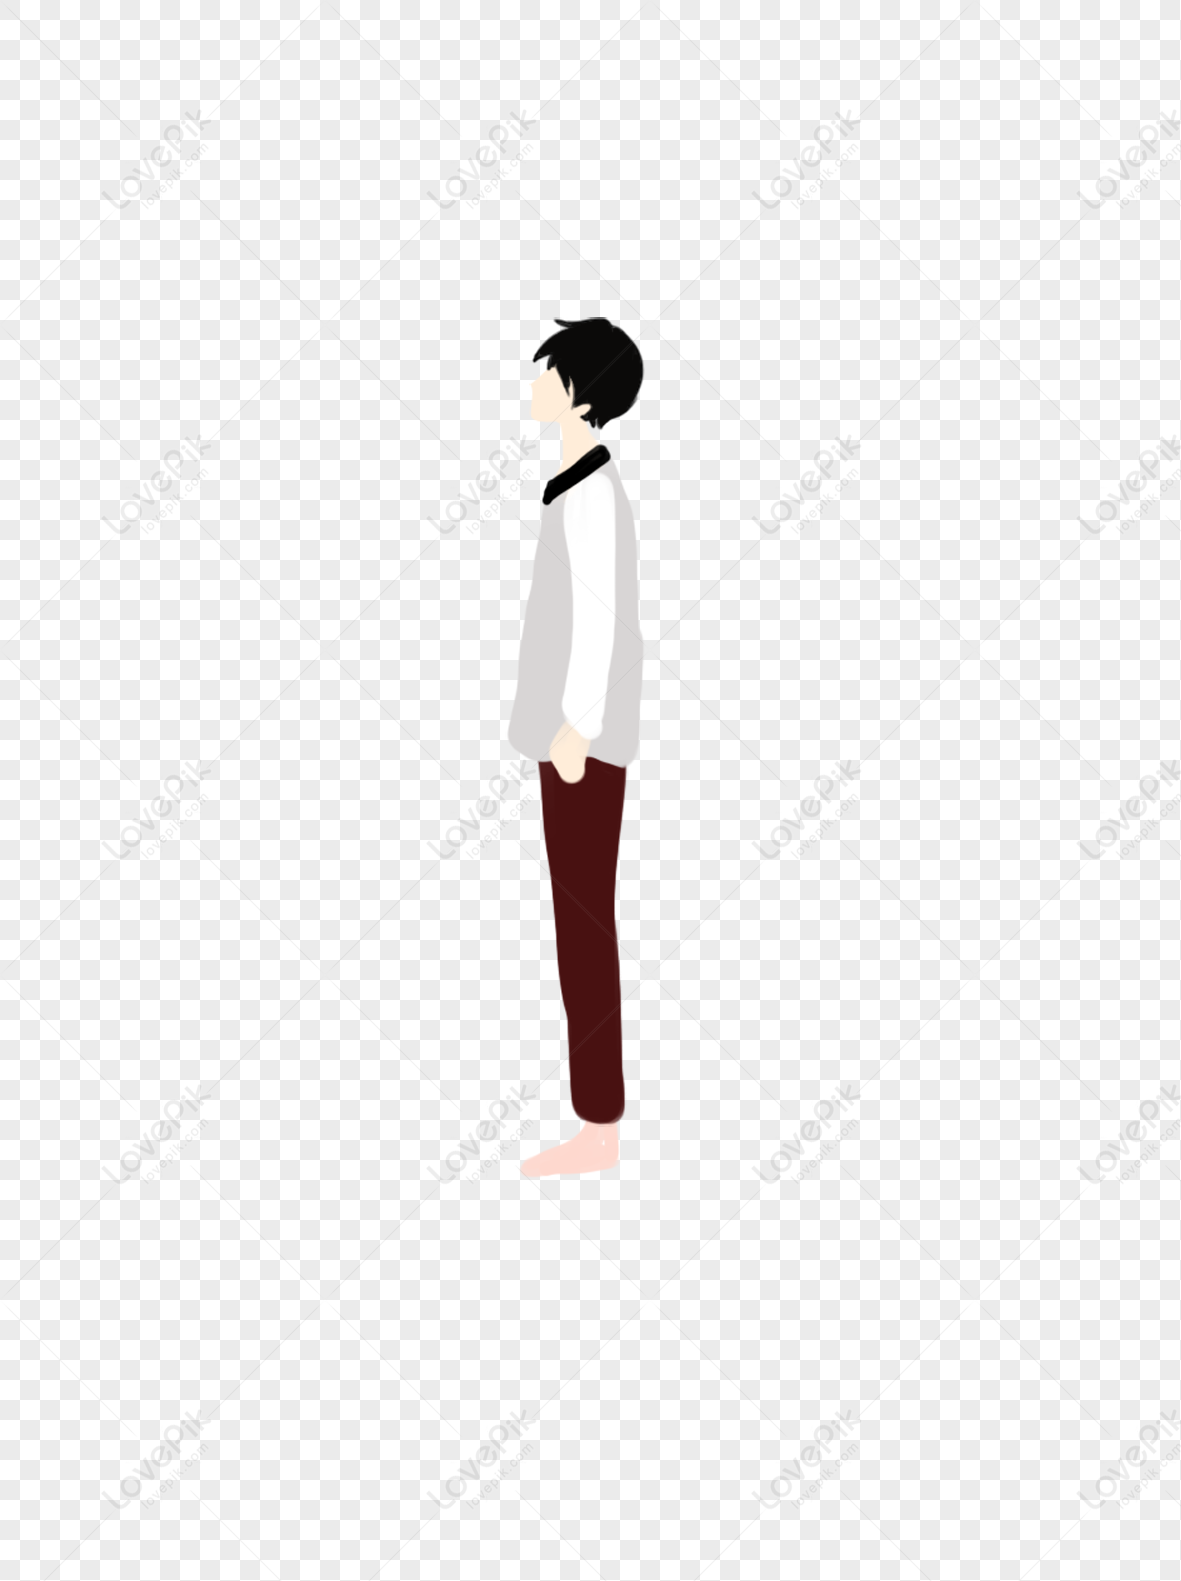 Cartoon Teenager PNG Image And Clipart Image For Free Download - Lovepik |  400638528